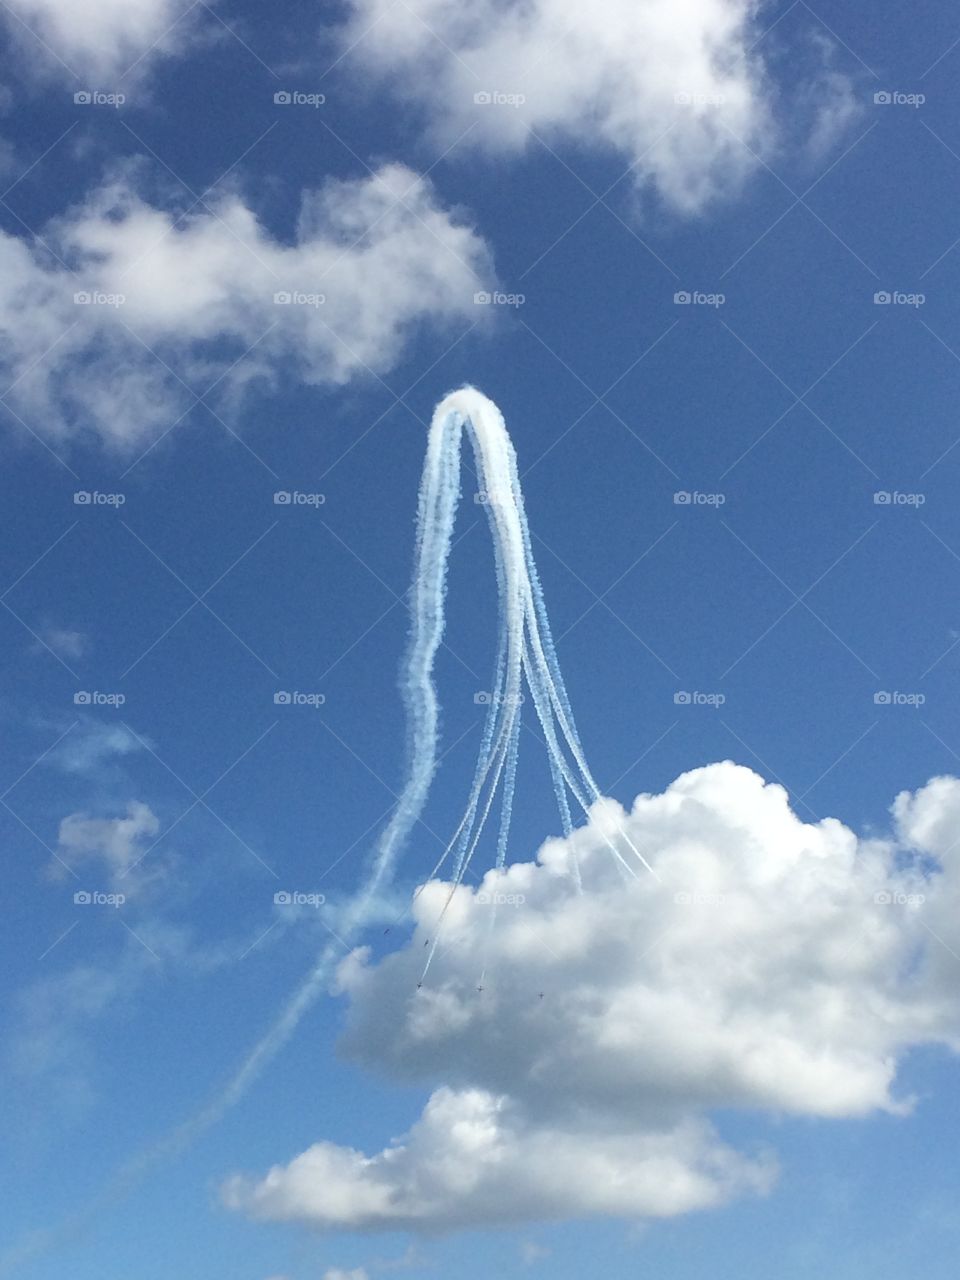 Red Arrows - Guernsey Air Display 2016